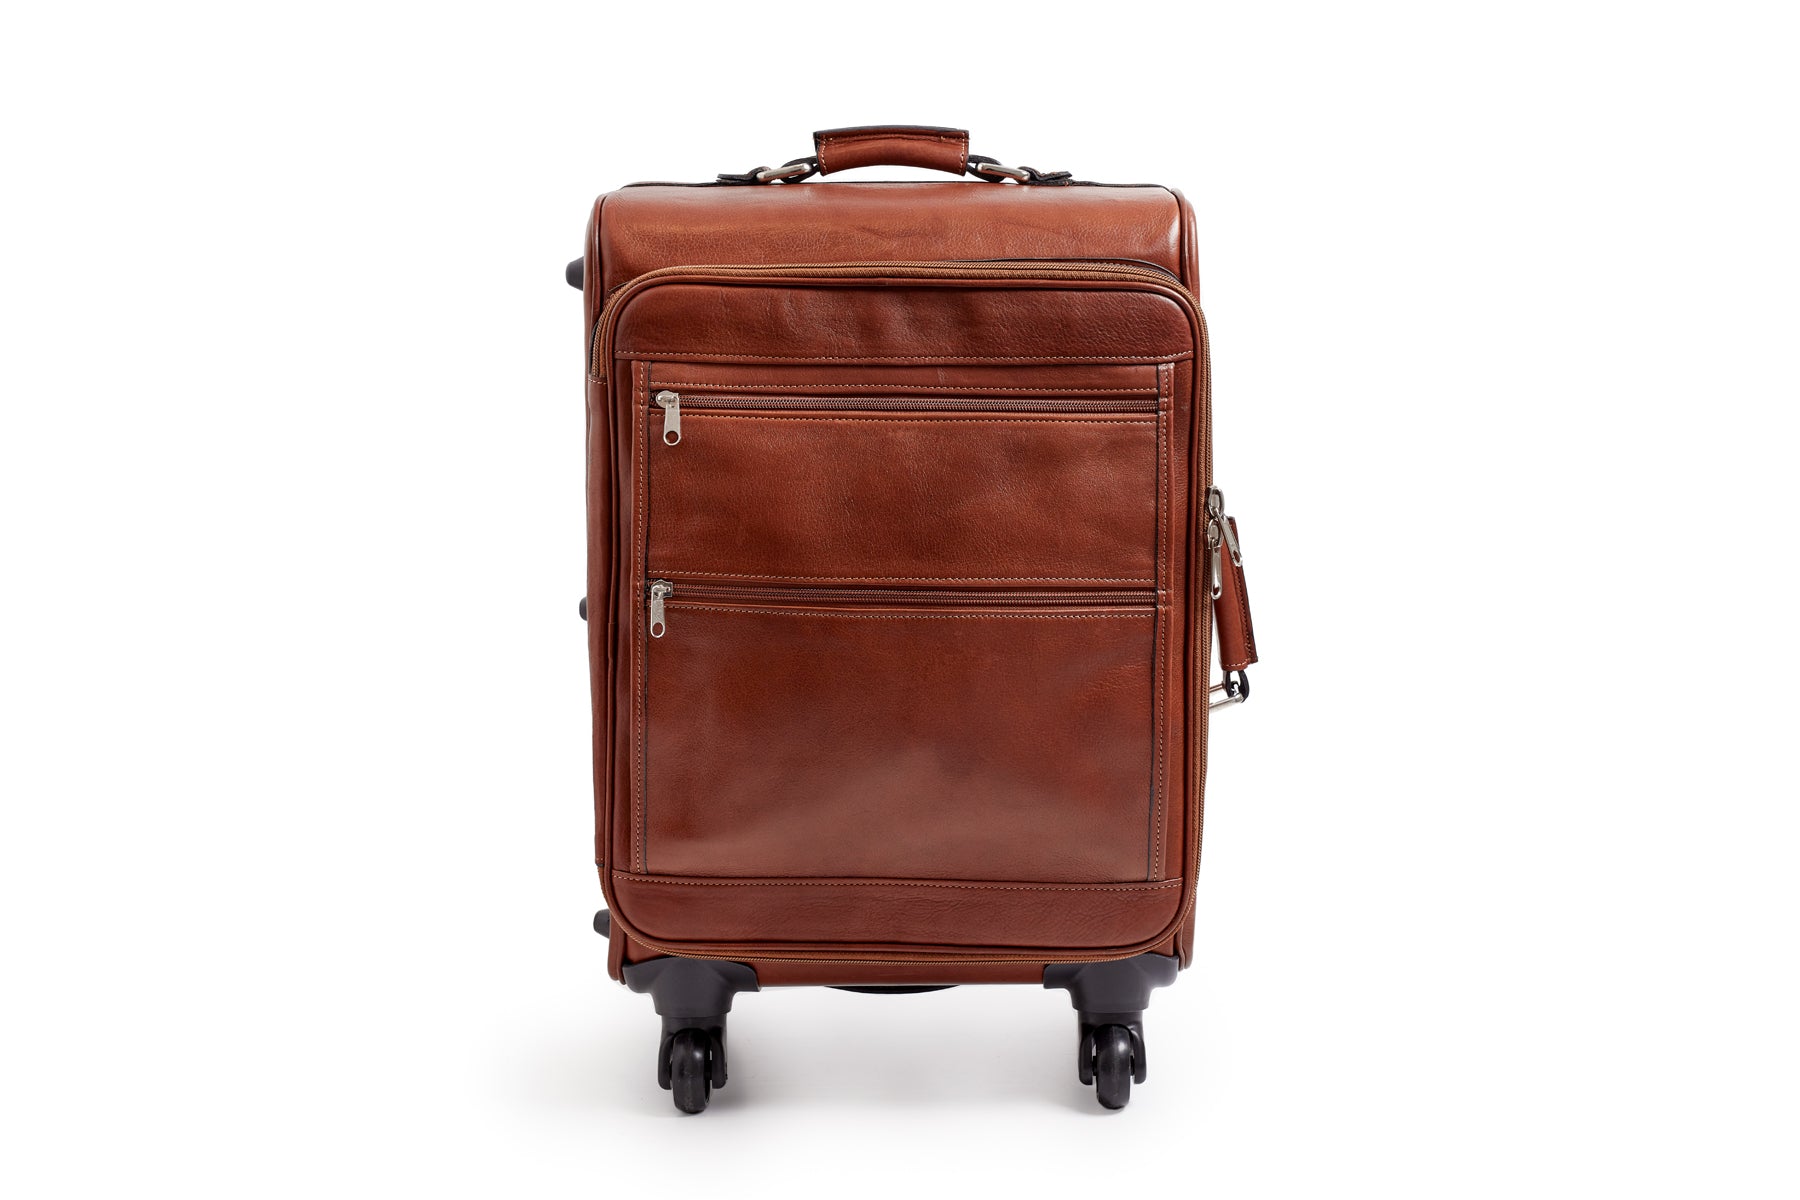 Vachetta leather carry on luggage with wheels. | Vakiano